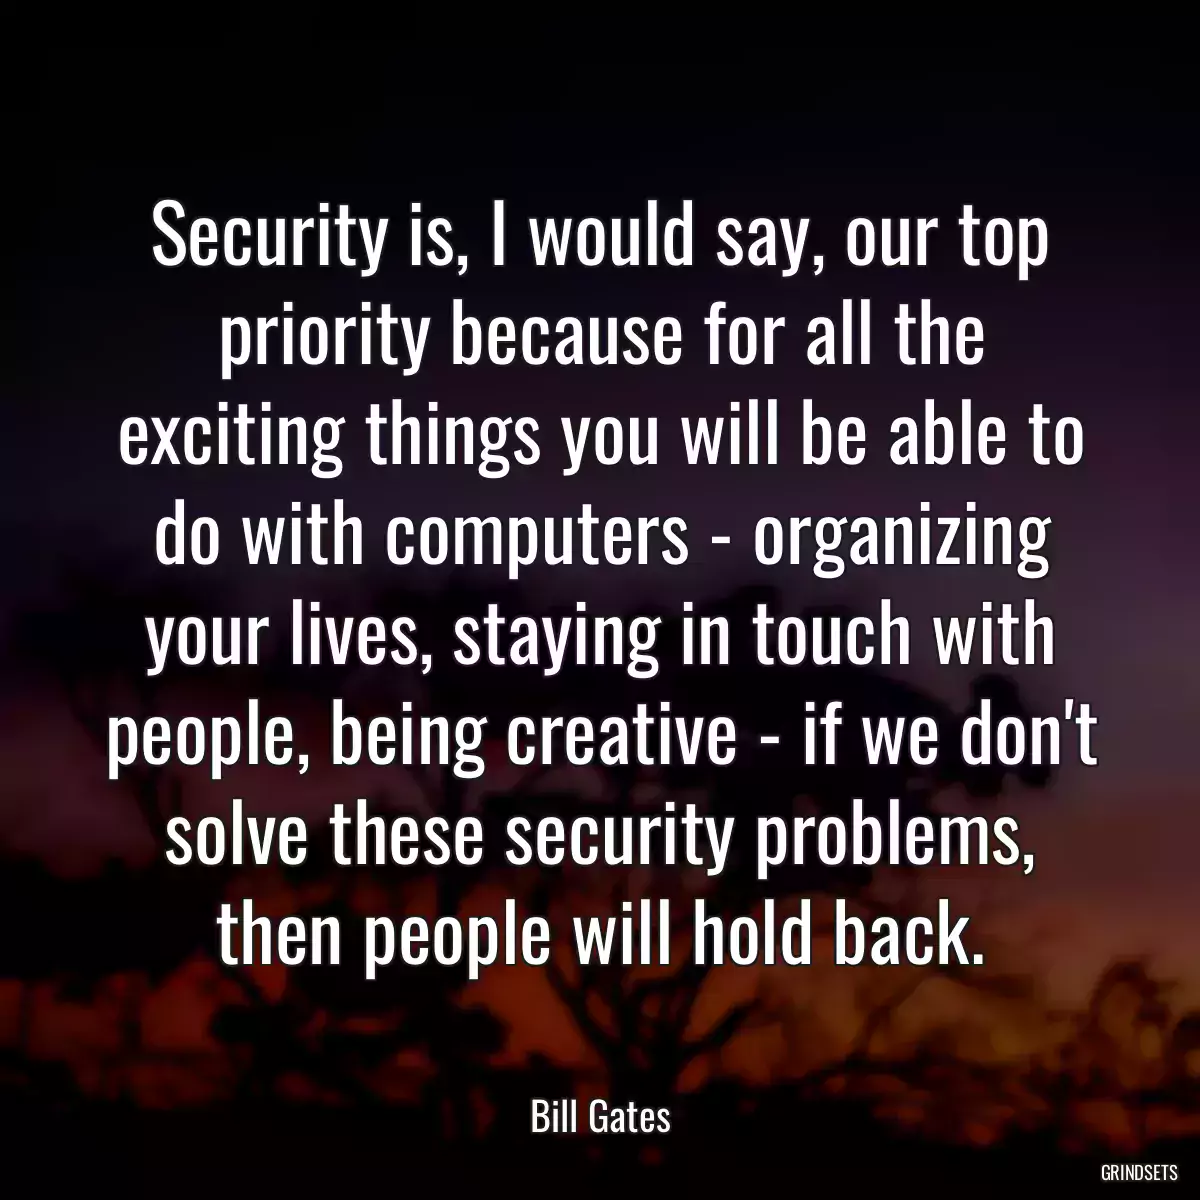 Security is, I would say, our top priority because for all the exciting things you will be able to do with computers - organizing your lives, staying in touch with people, being creative - if we don\'t solve these security problems, then people will hold back.